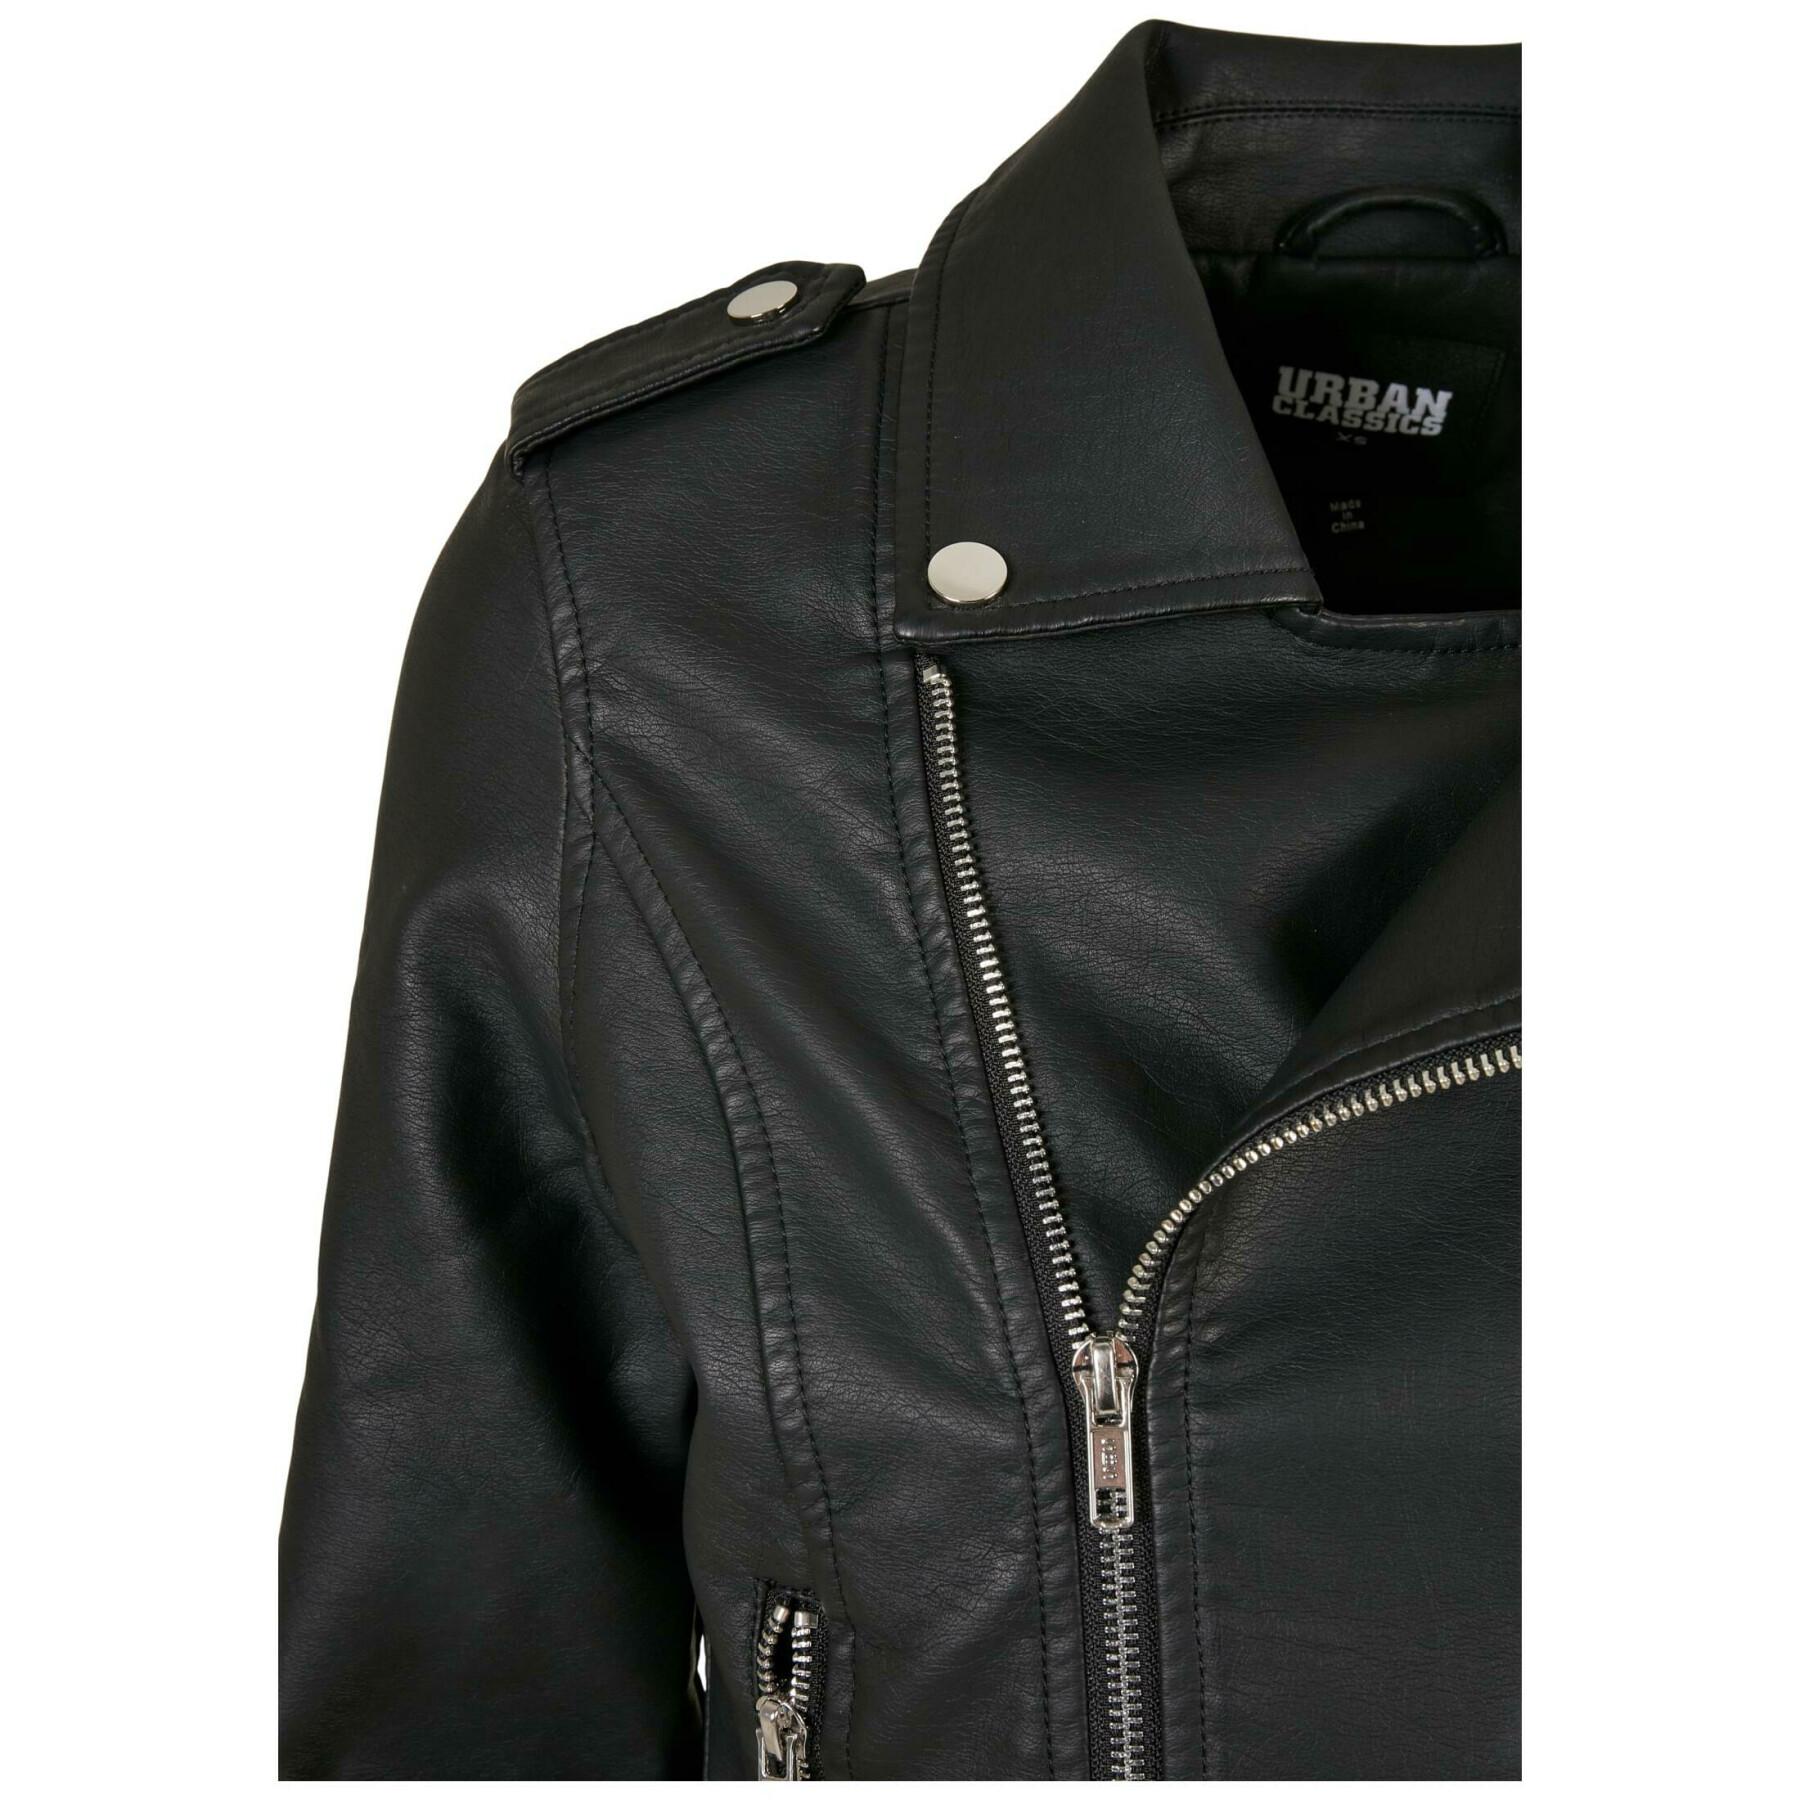 Synthetic leather jacket with belt woman Urban Classics Biker